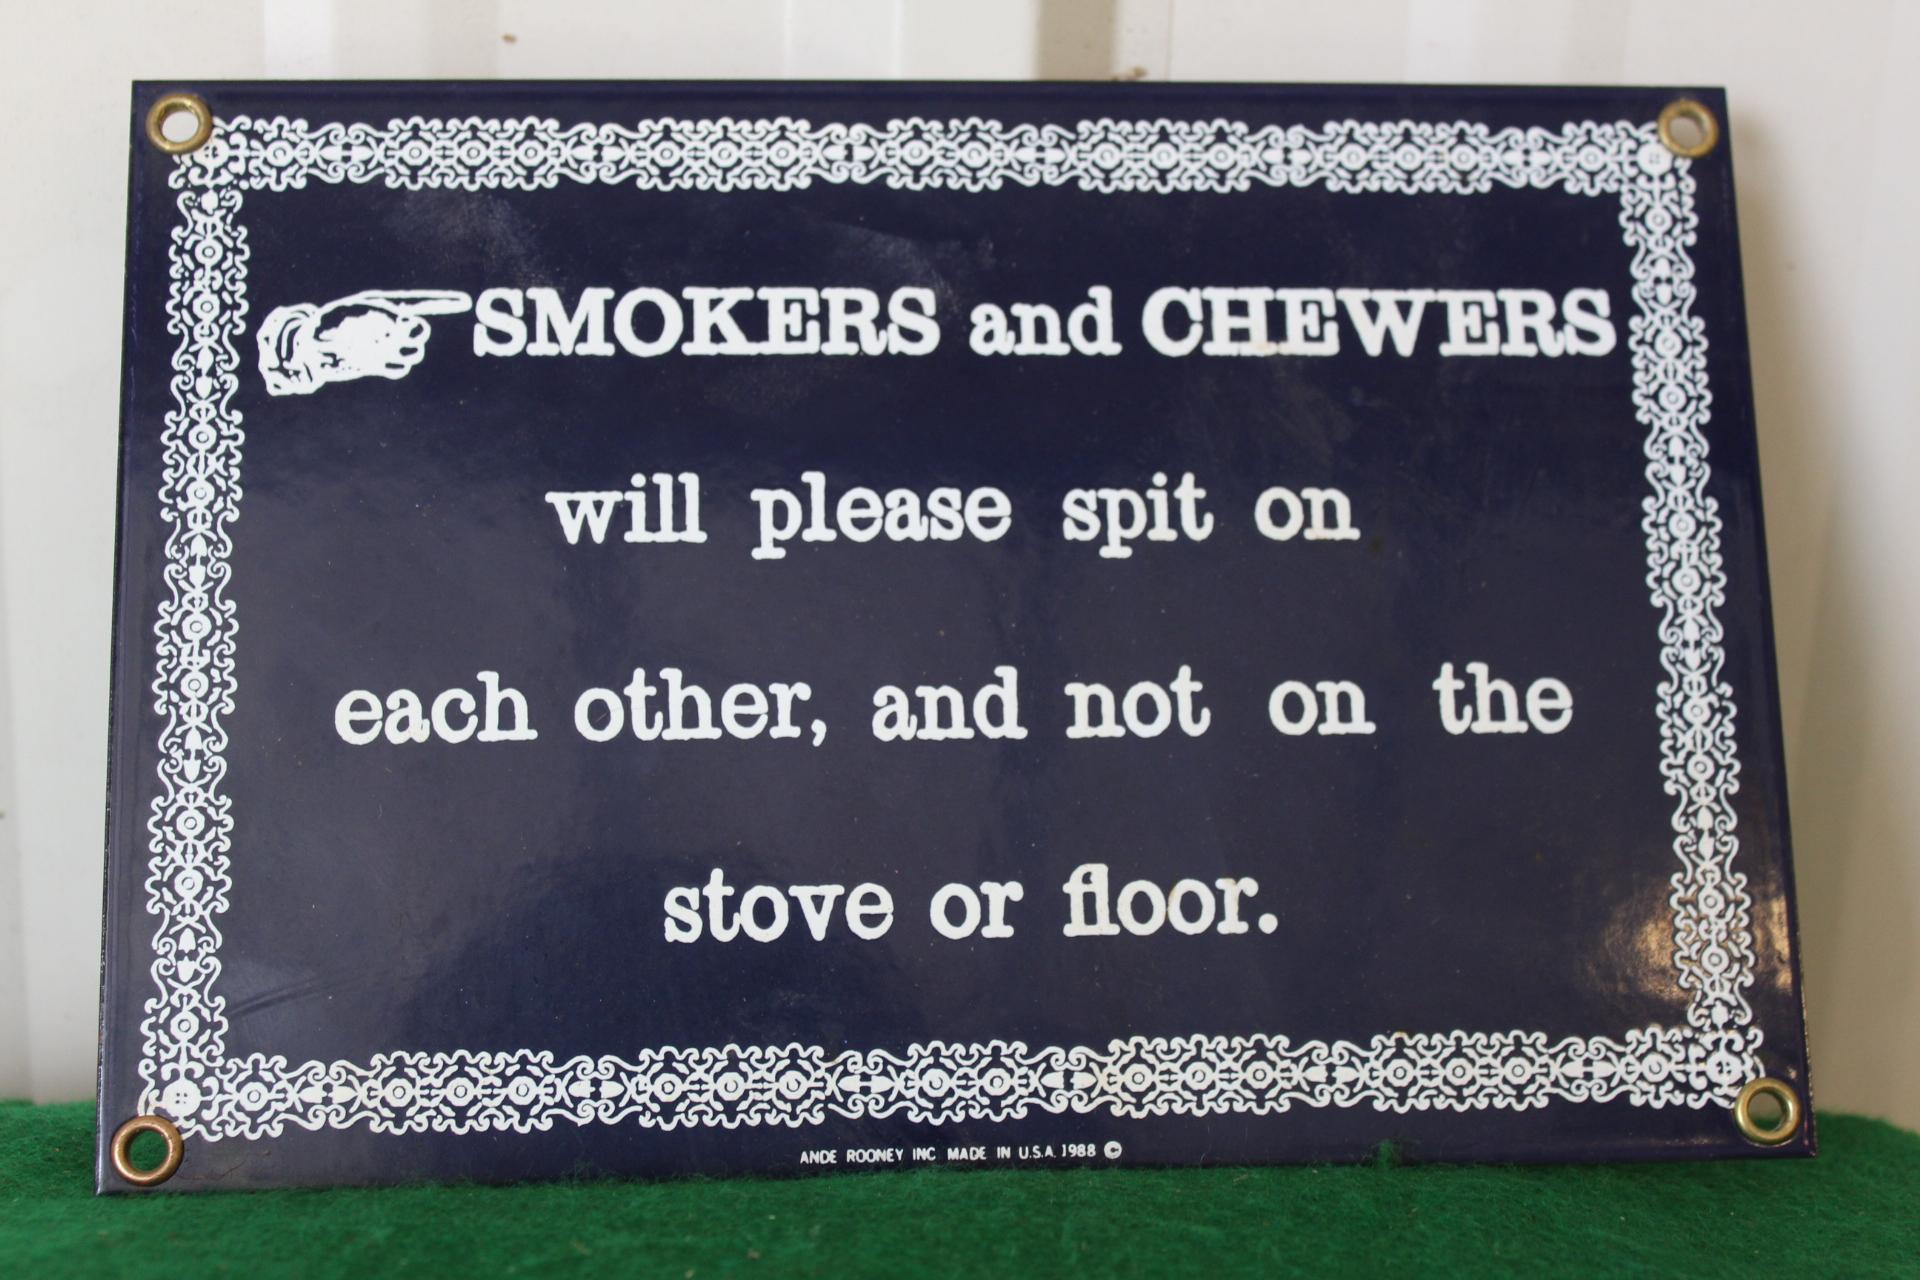 "Smokers and chewers will please spit on each other and not on the stove or